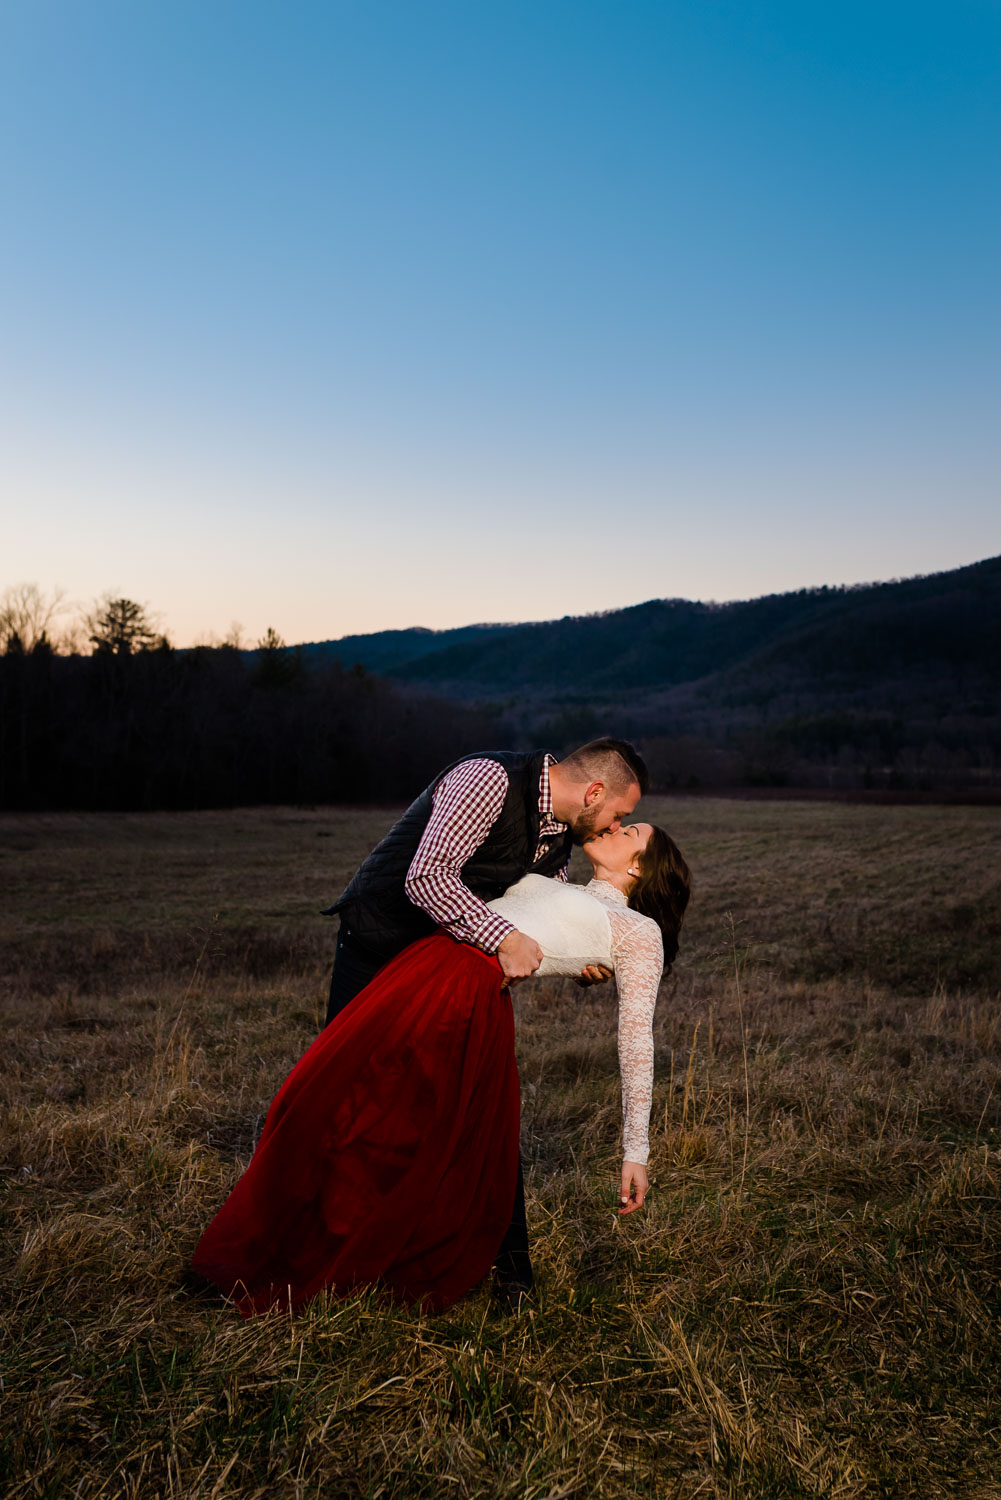 prewedding photo inspiration after dark with guy dipping girl back for an epic kiss